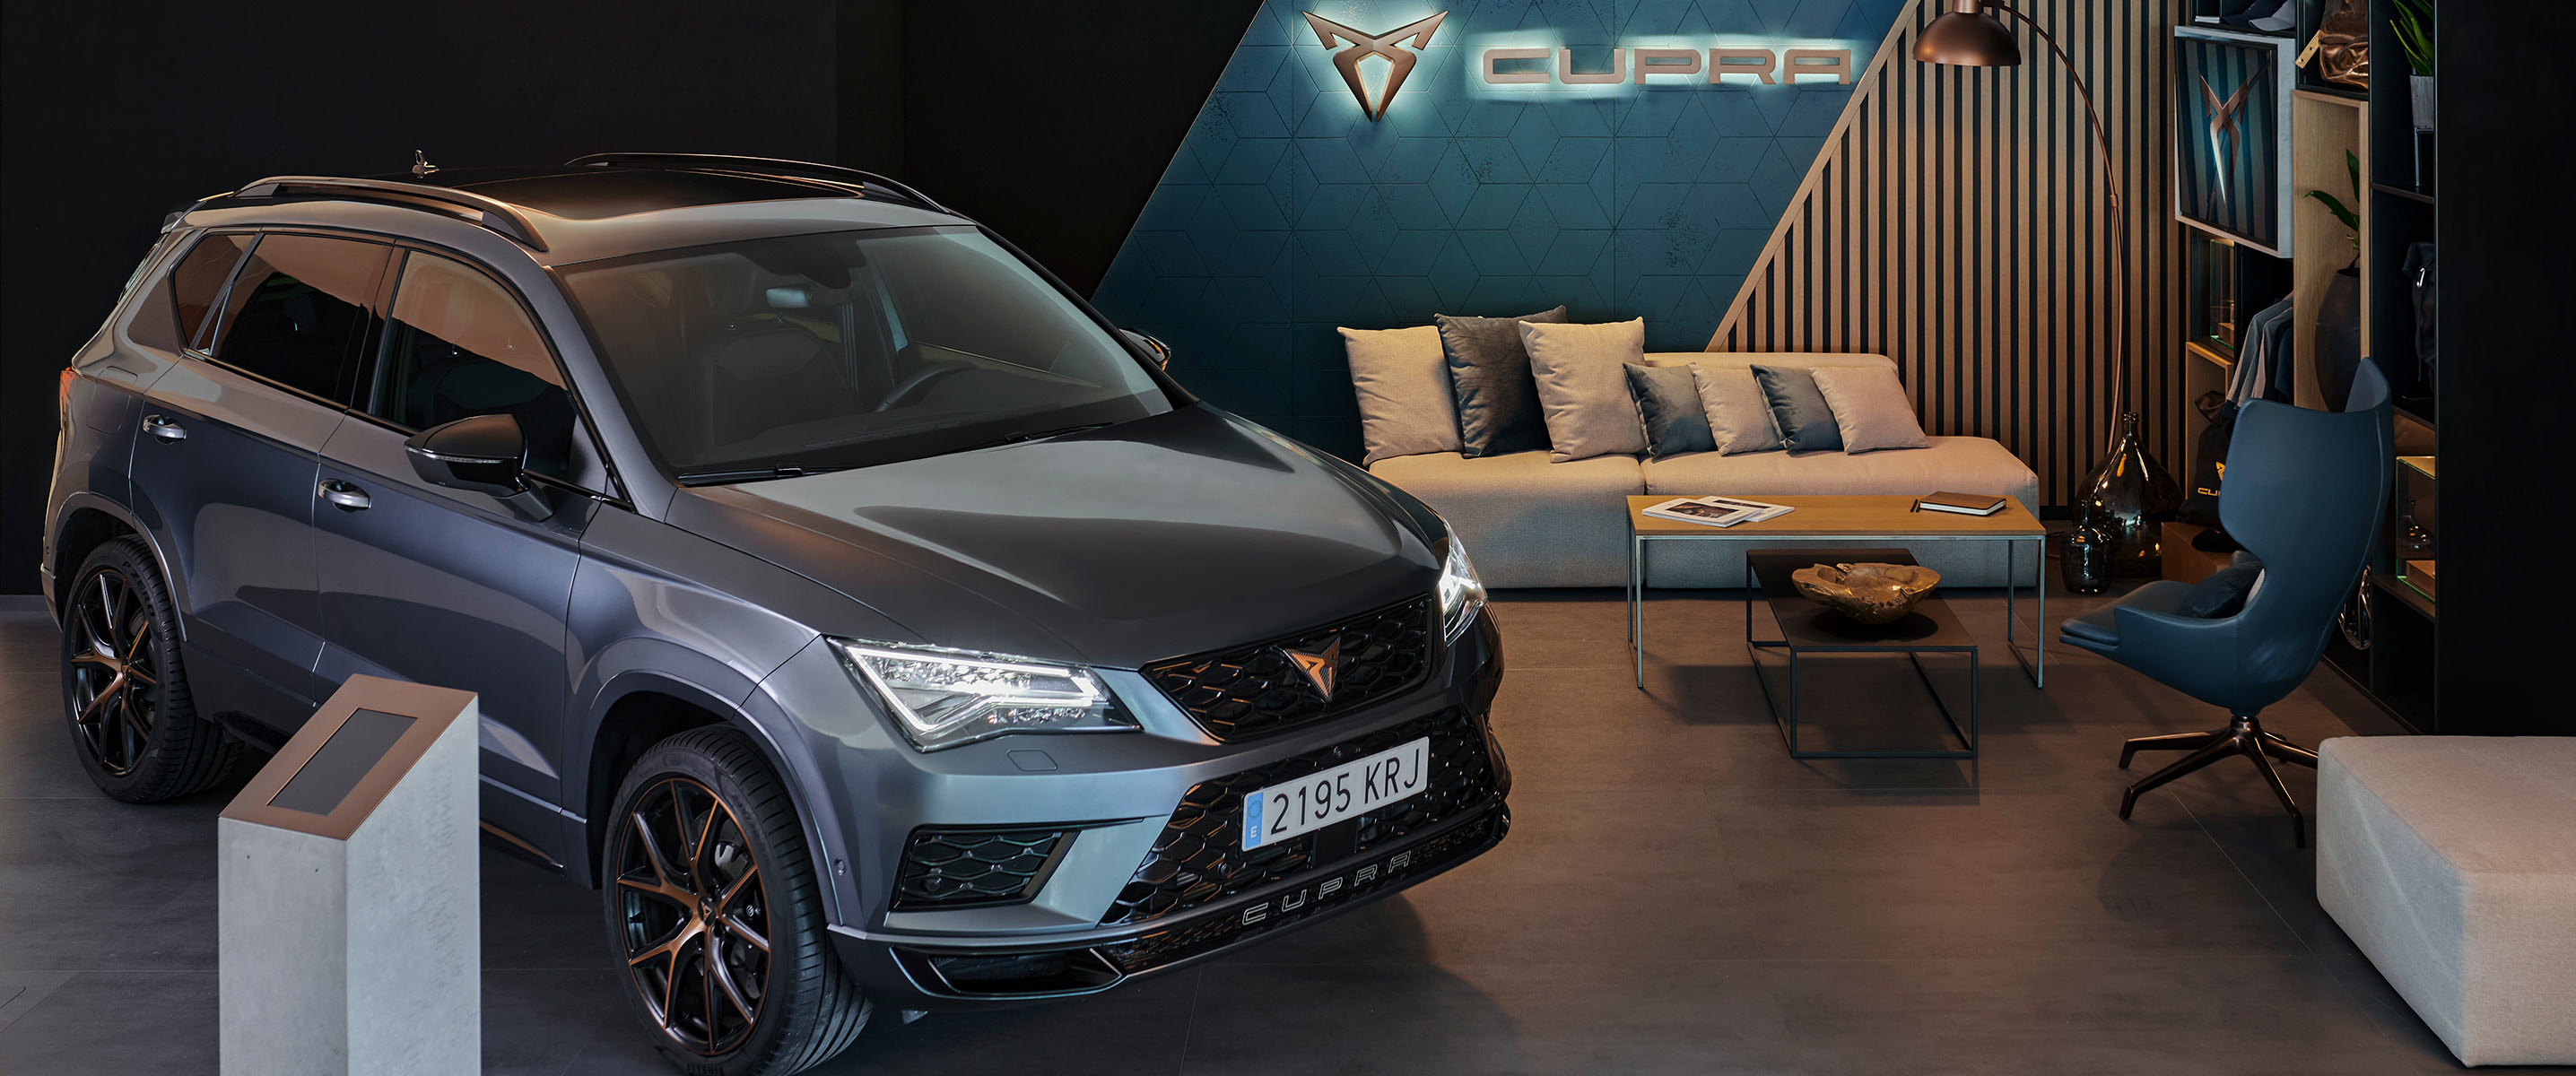 Experience in the CUPRA room